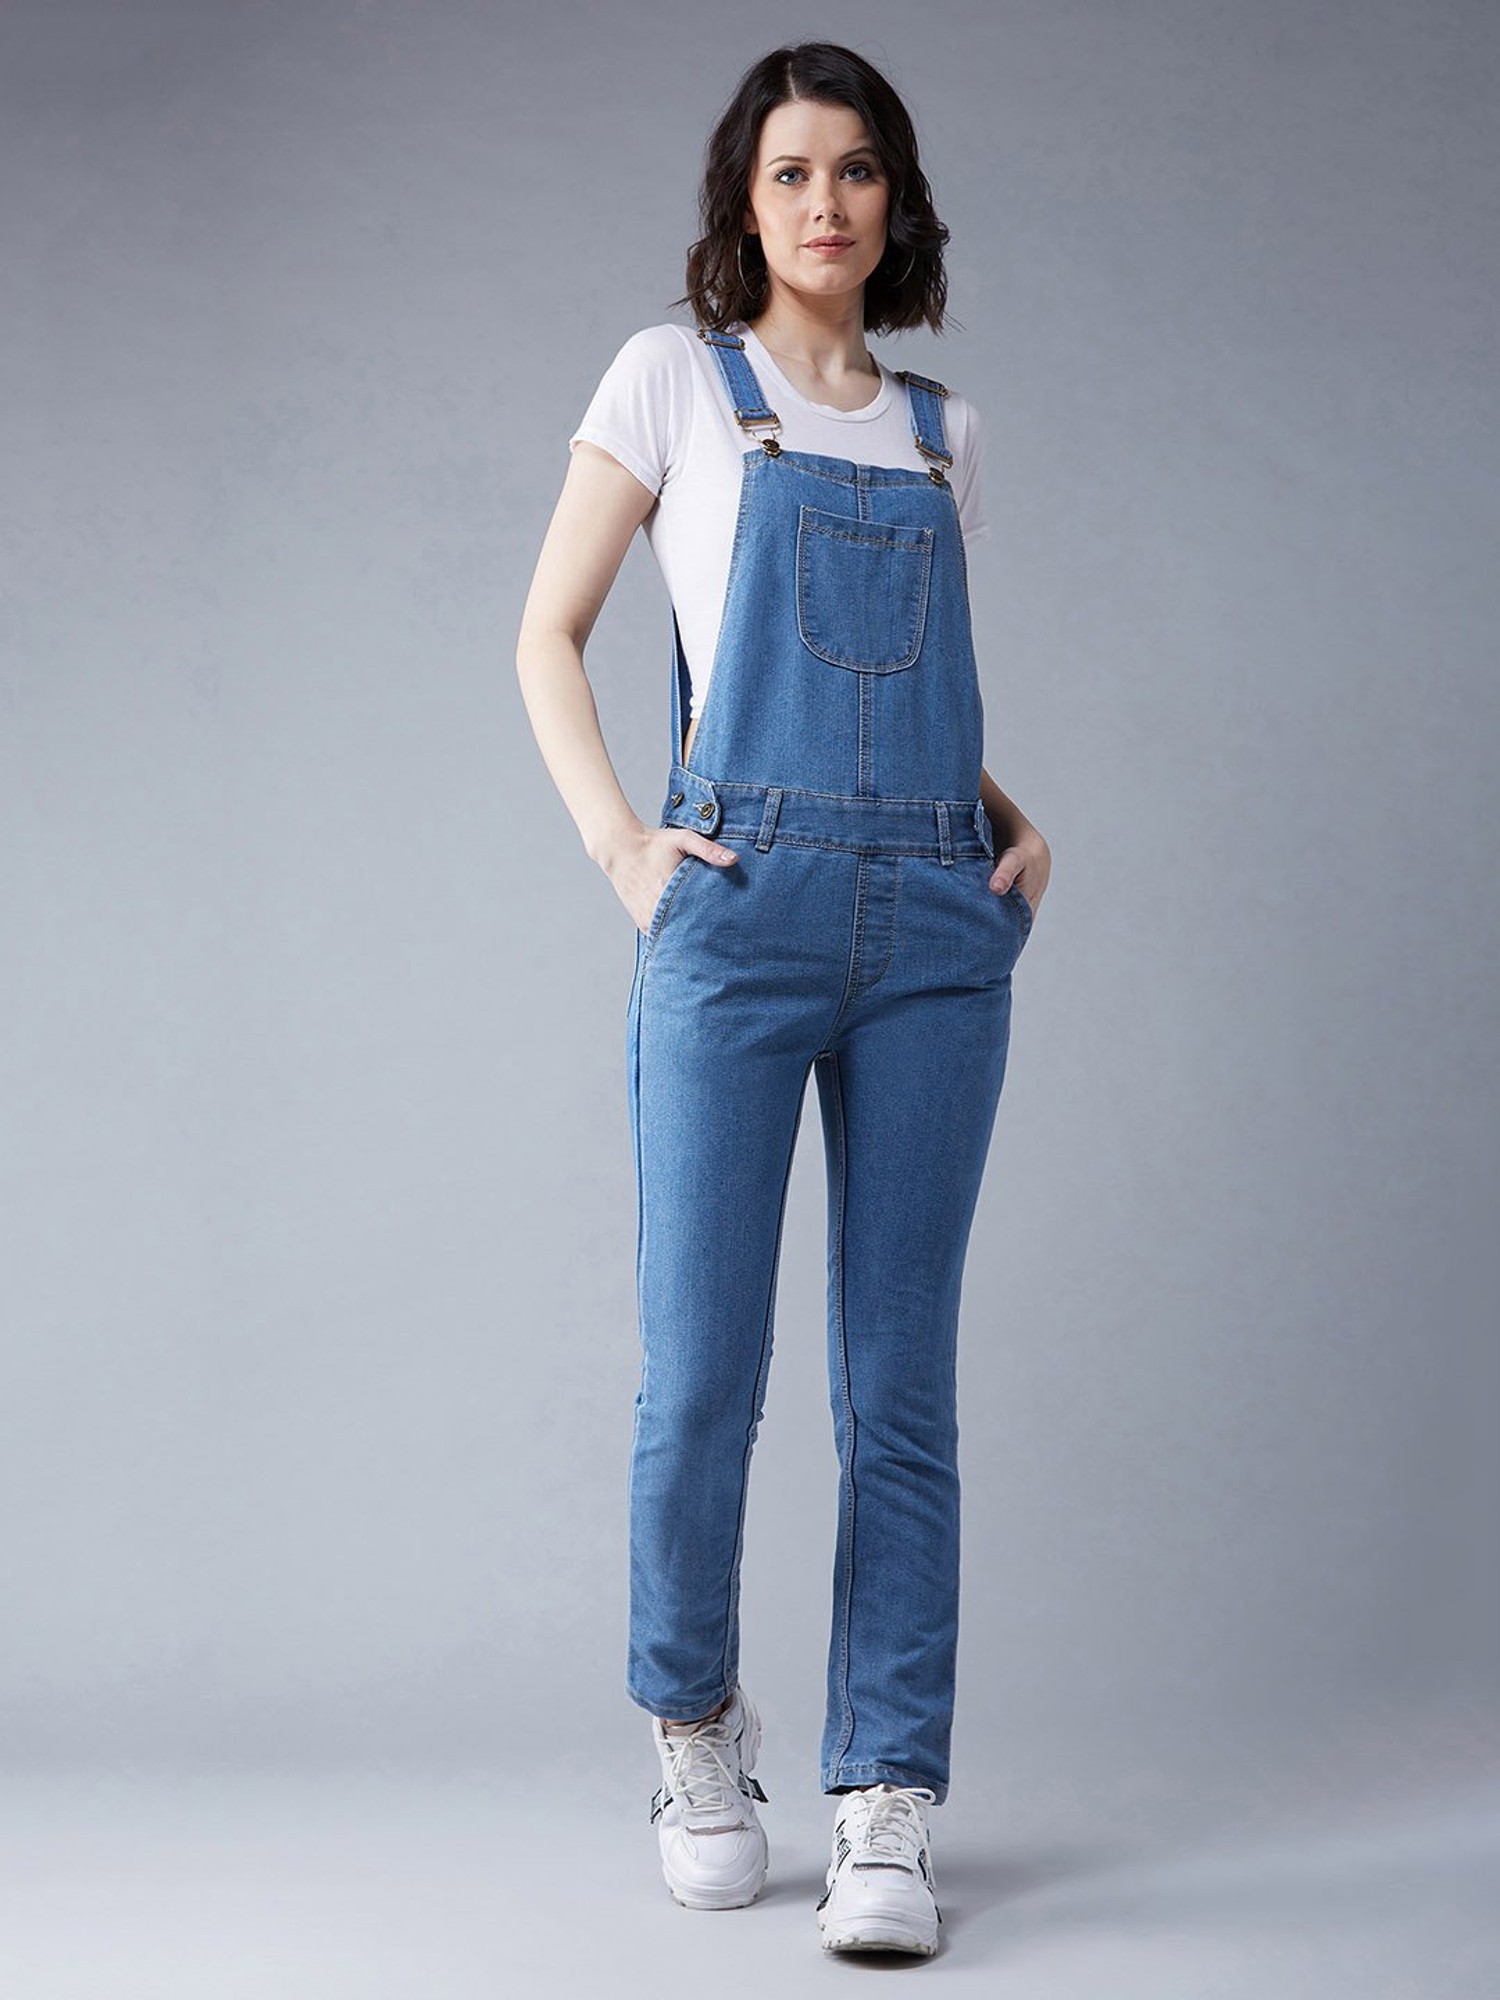 EASEL WASHED DENIM OVERALLS/JUMPSUIT |JEANS | FREDERICKSBURG – Yee Haw  Ranch Outfitters